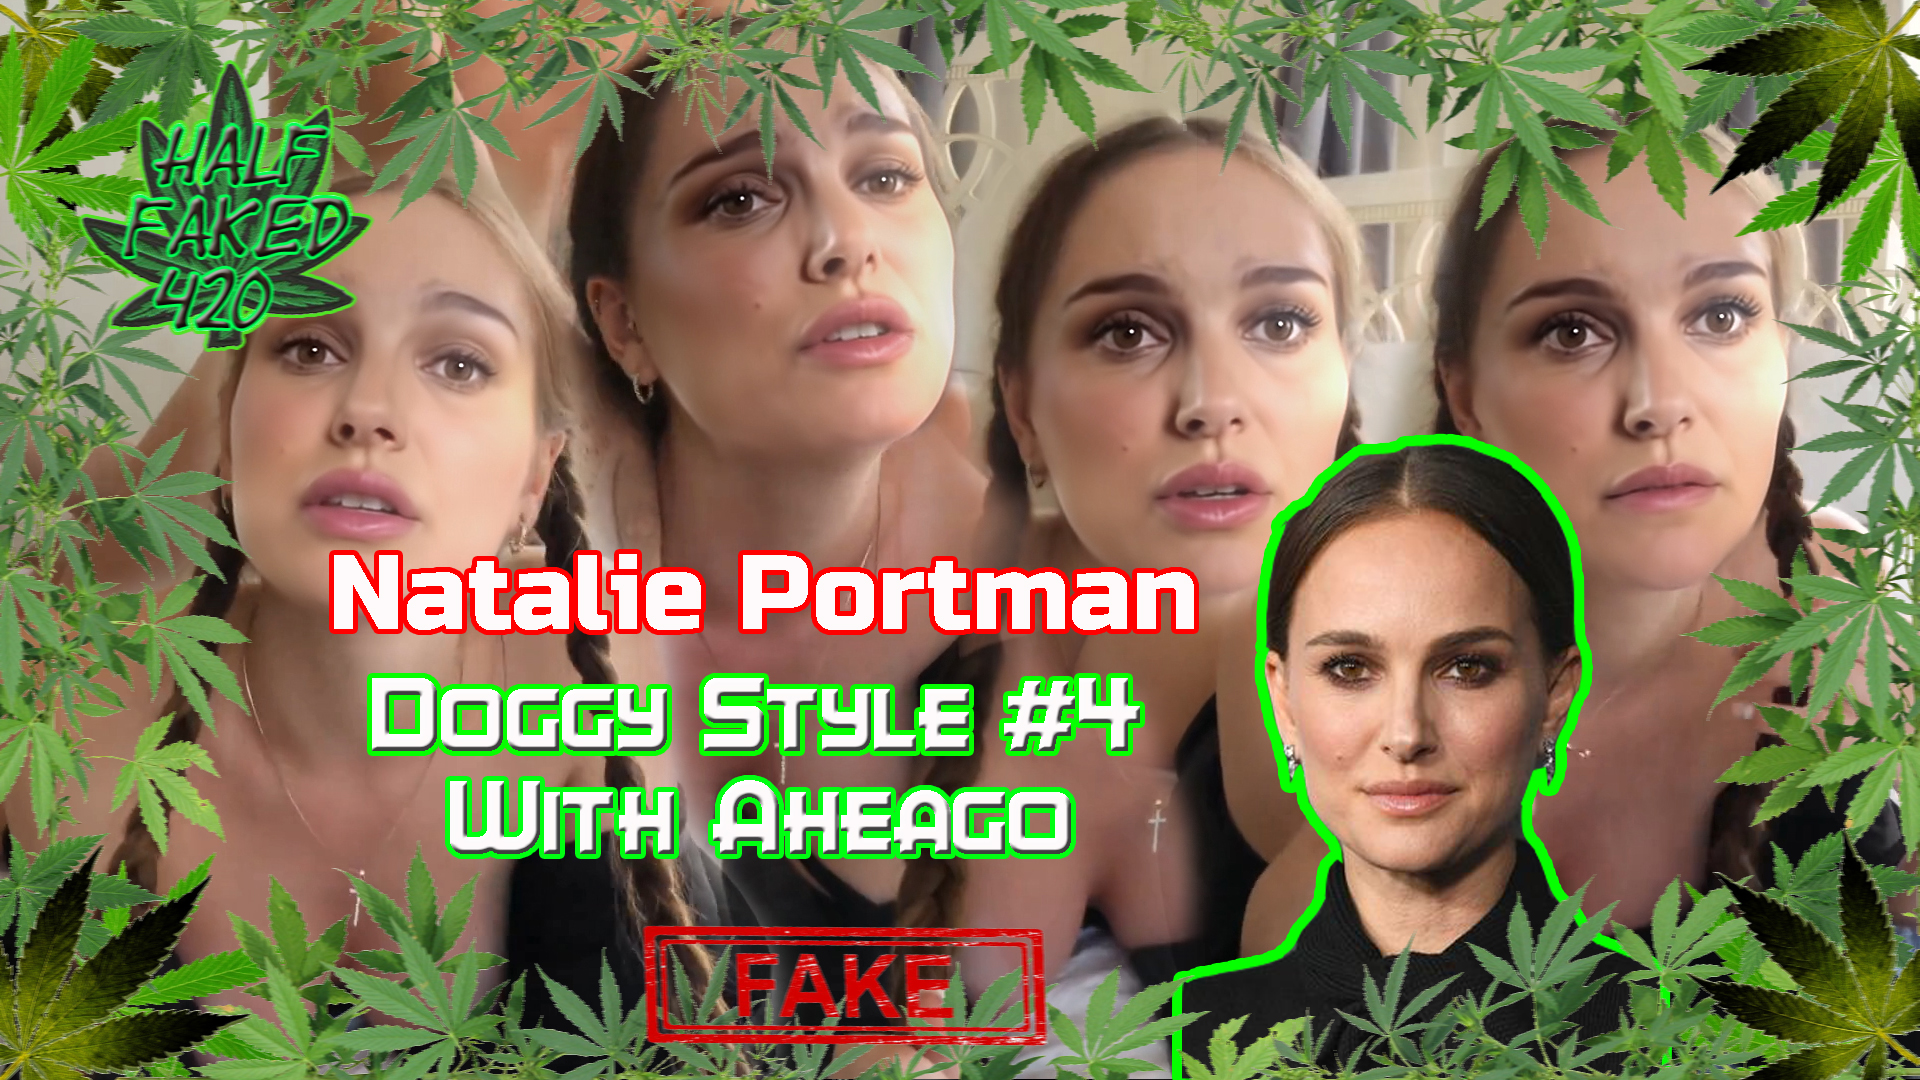 Natalie Portman - Doggy style #4 (with Ahegao) | FAKE | NEW MODEL - 384 res.